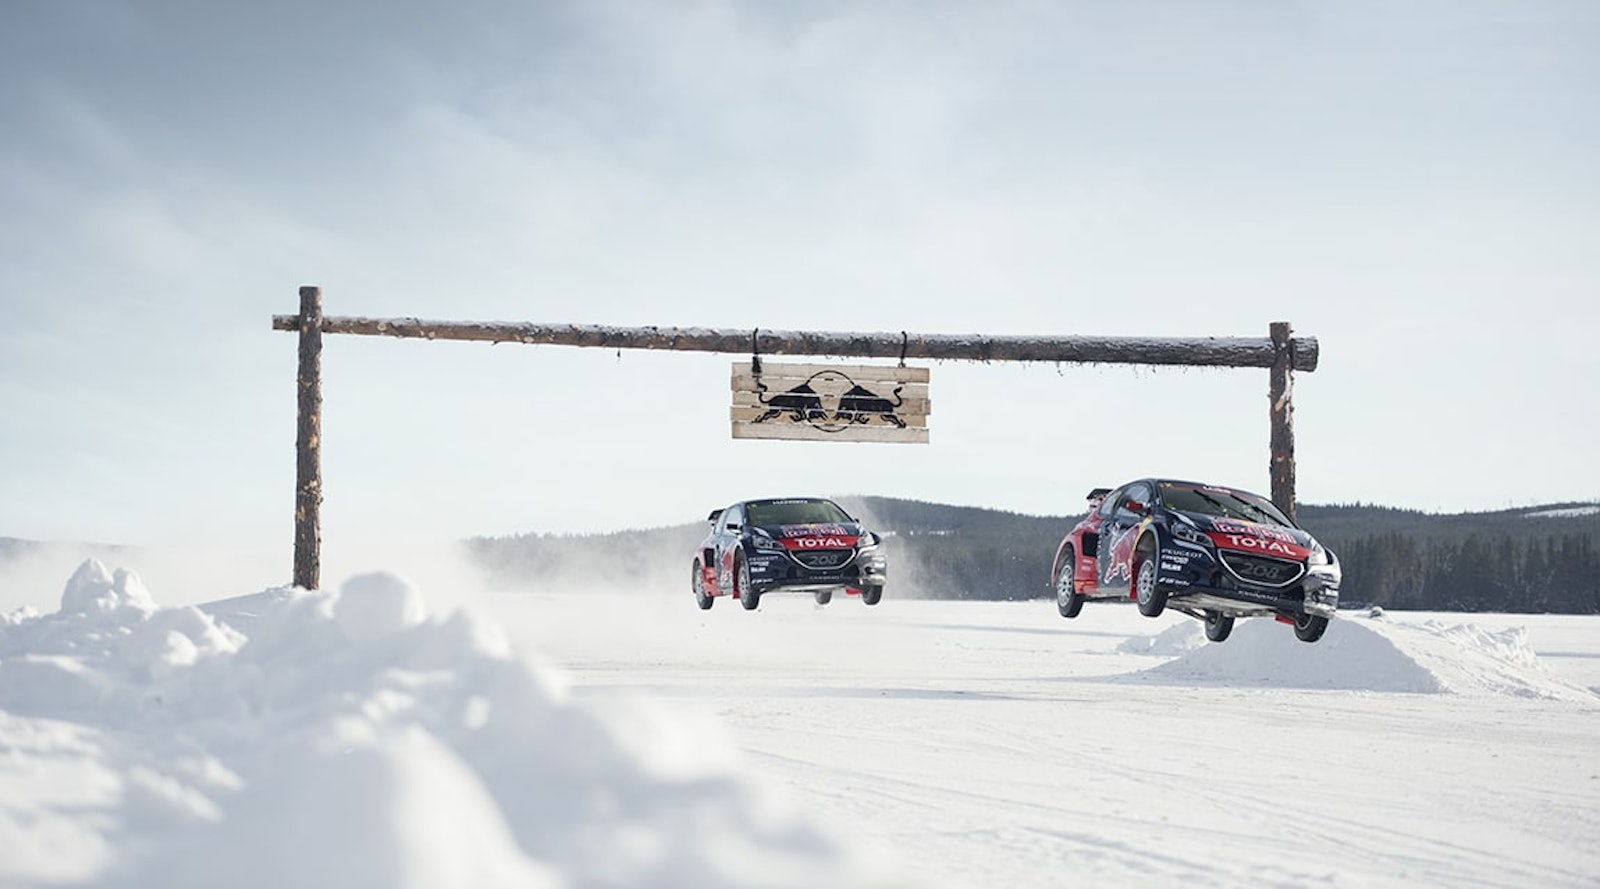 Sebastien Loeb and Timmy Hansen perform during the Rallycross on Ice project in Are, Sweden on February 16, 2016 // Oskar Bakke/Red Bull Content Pool // P-20160226-00309 // Usage for editorial use only // Please go to www.redbullcontentpool.com for further information. //